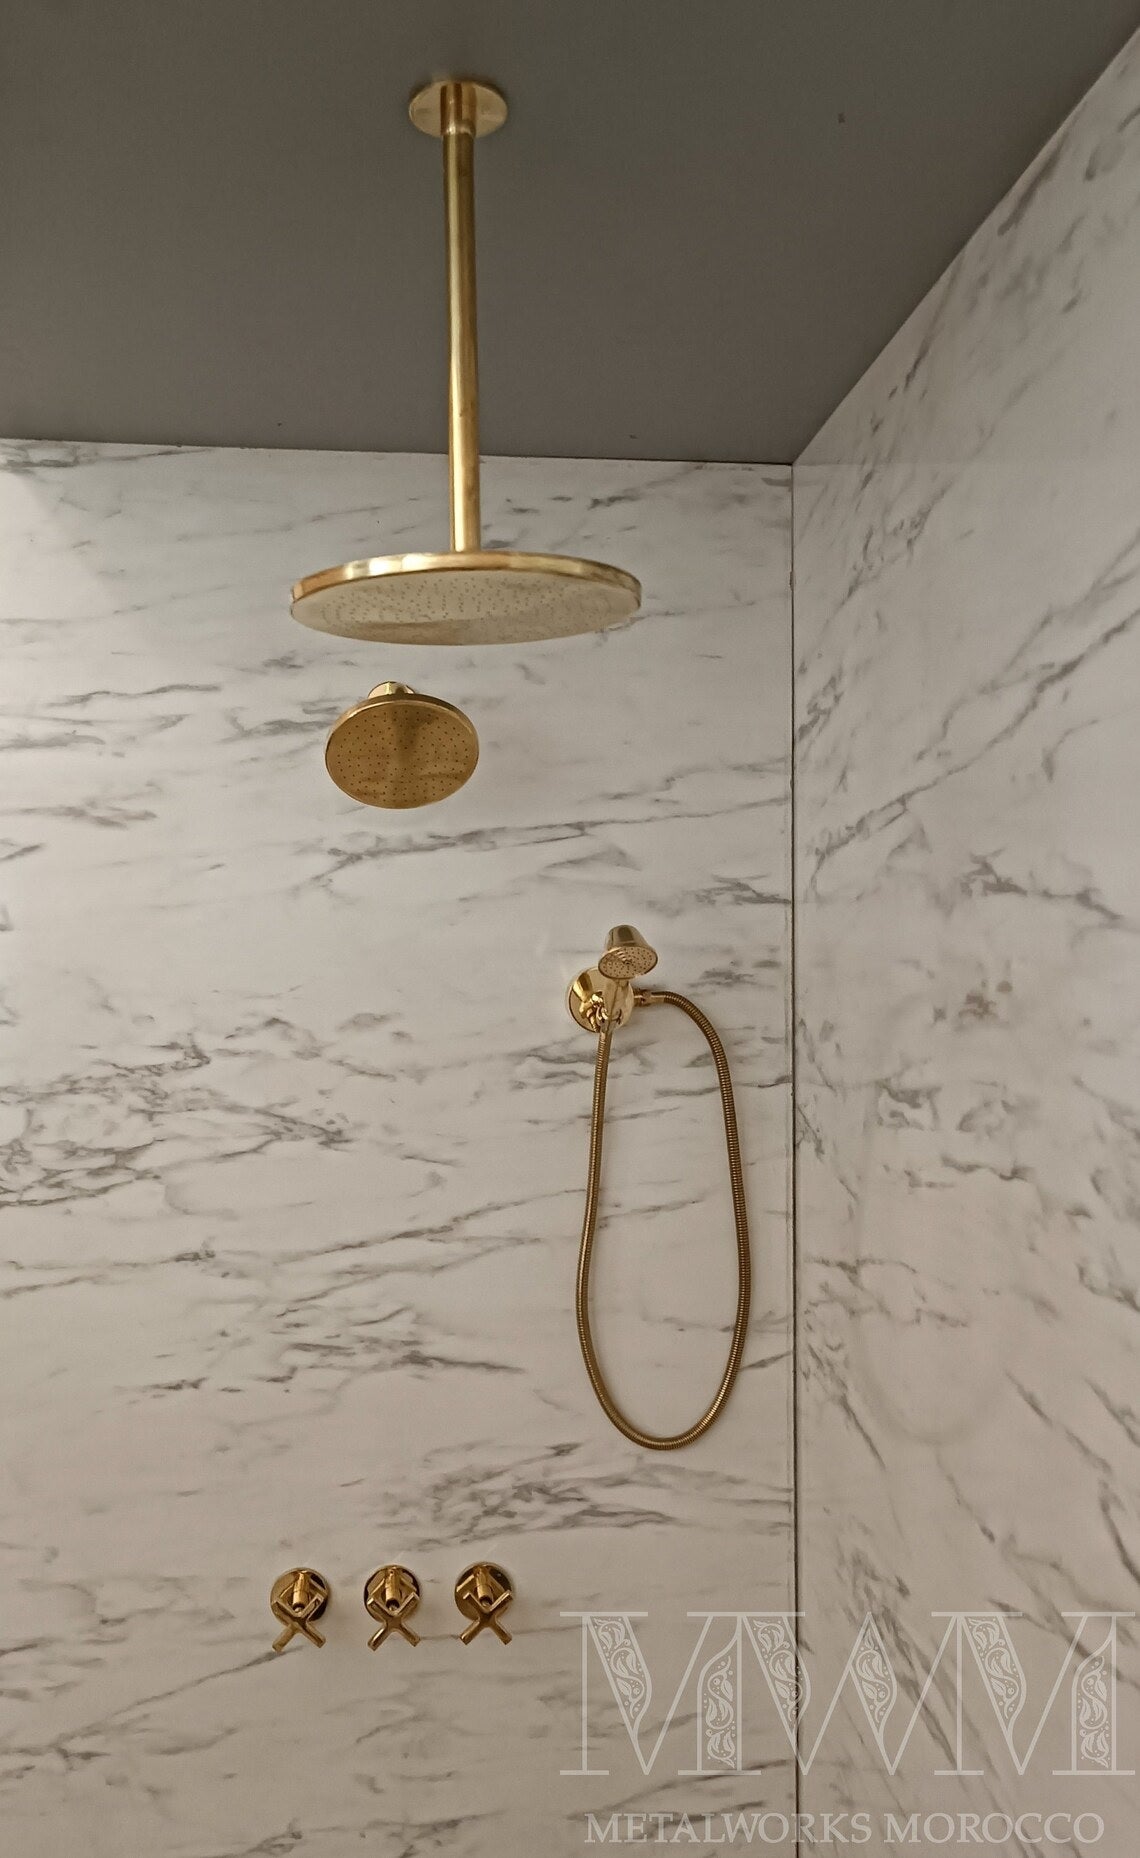 Polished Brass Shower System - Wall Mounted And Ceiling Rain Shower Head